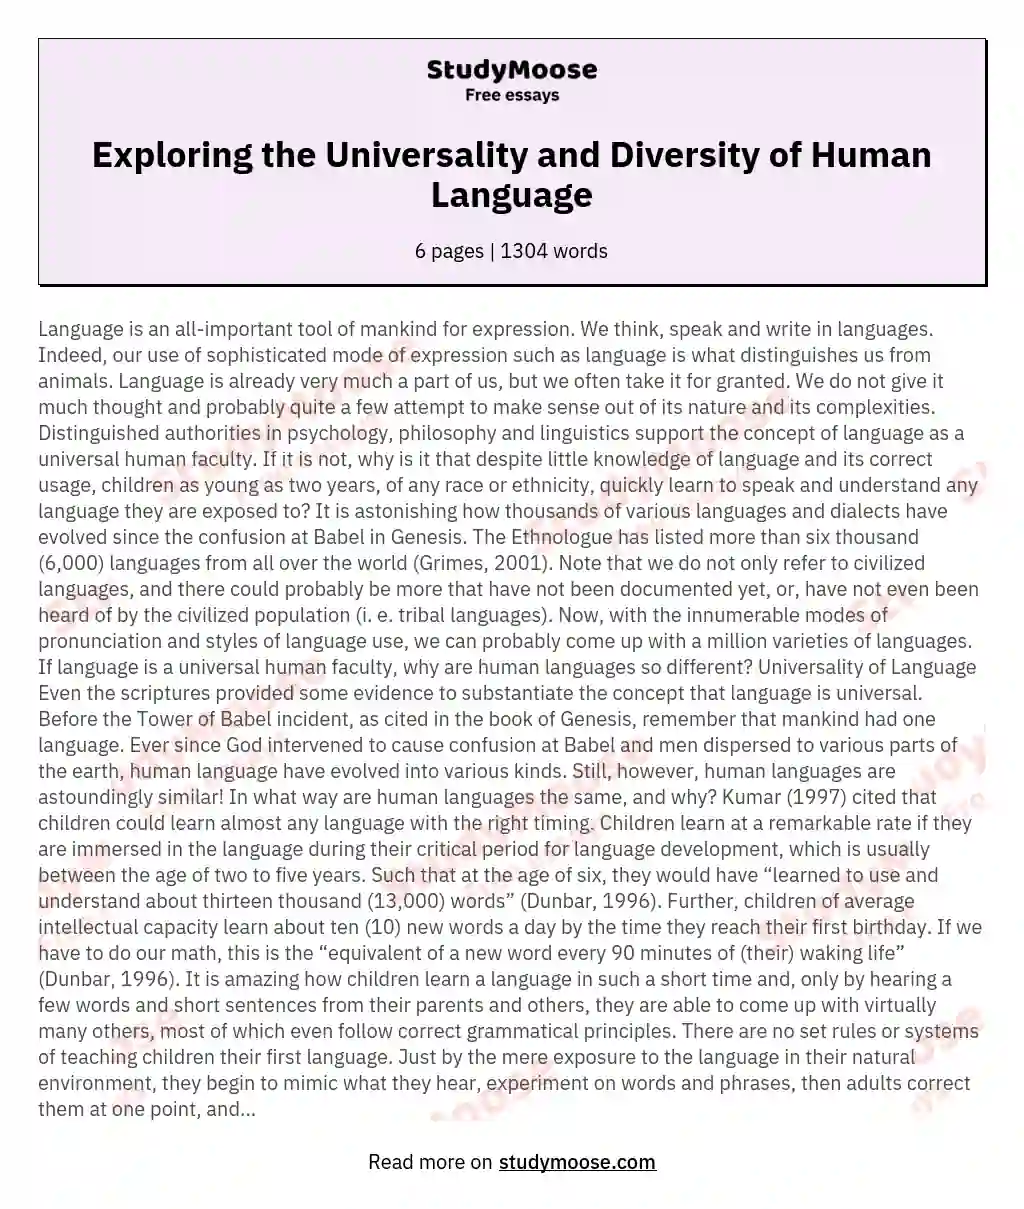 Exploring the Universality and Diversity of Human Language essay